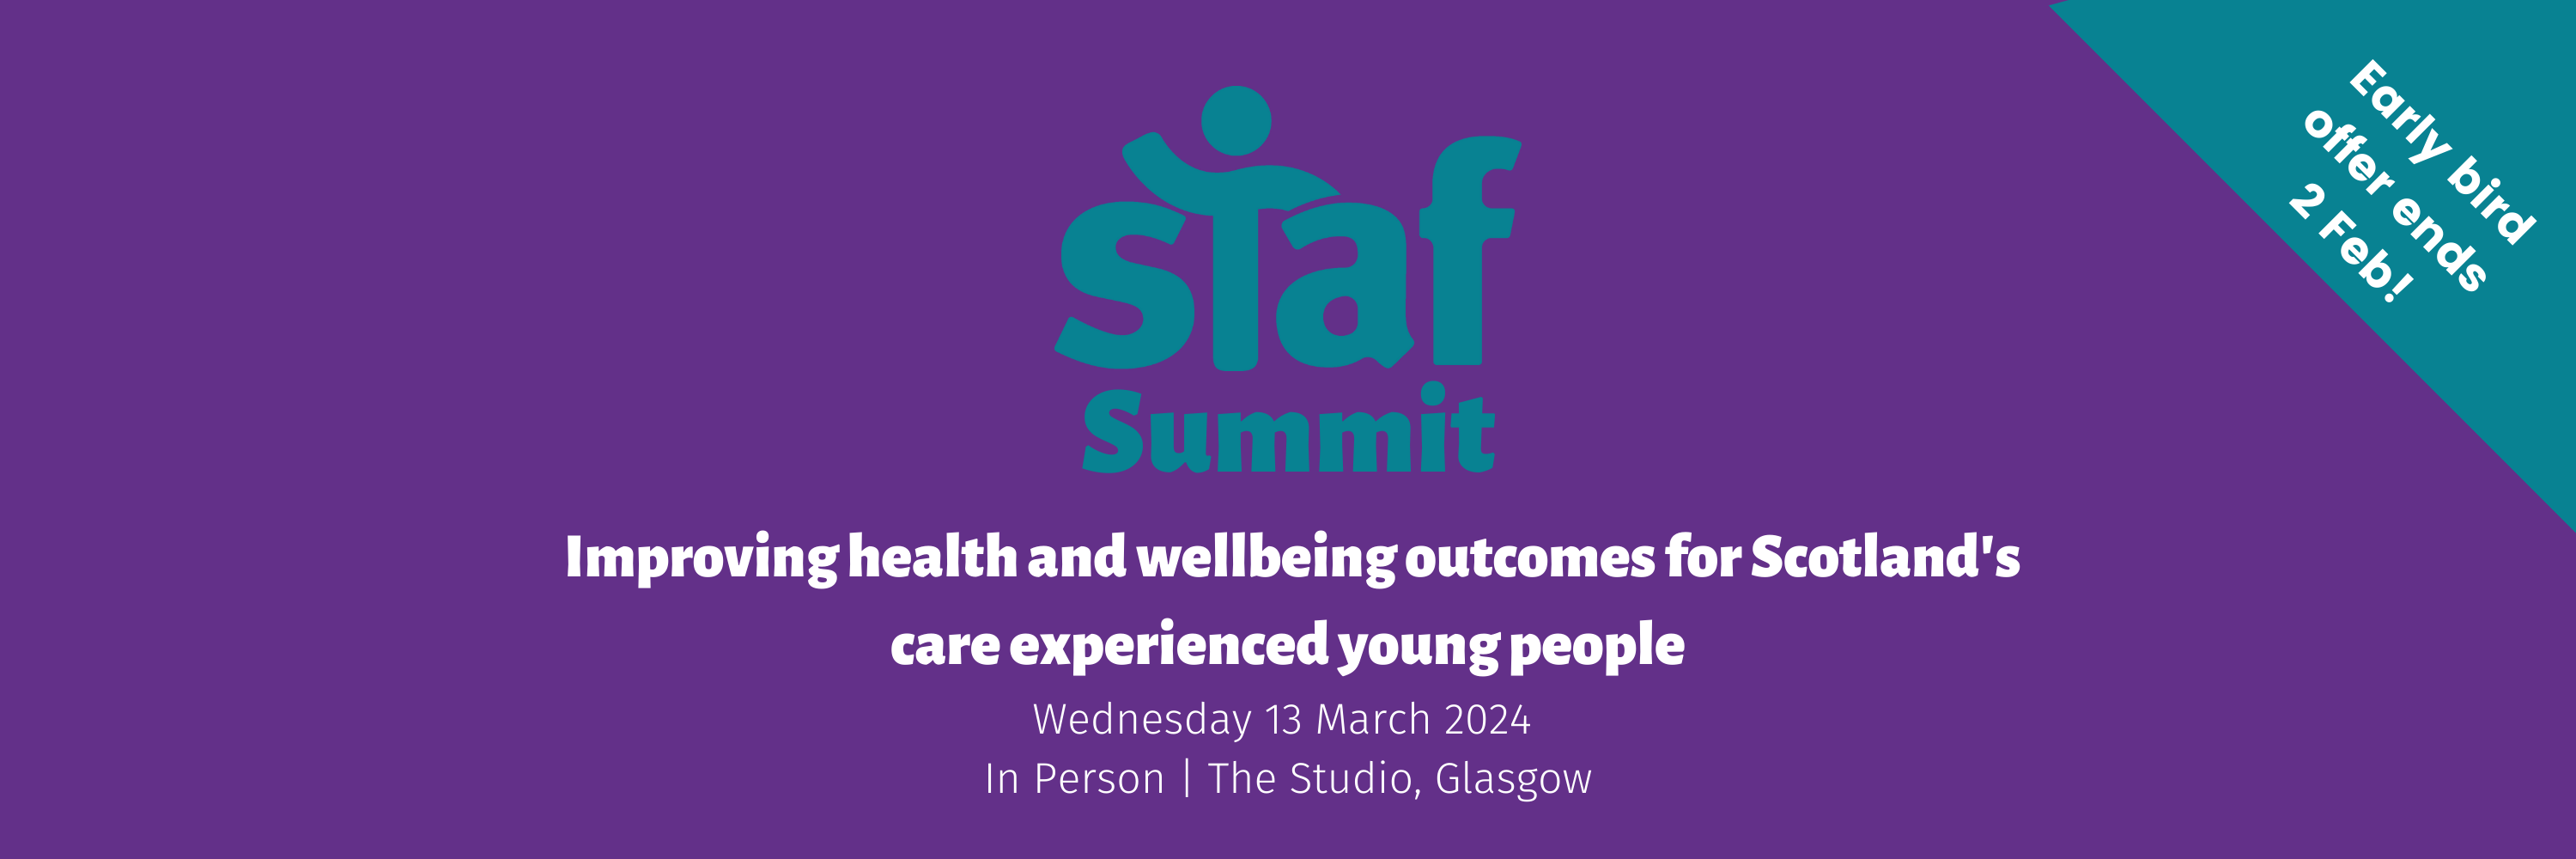 Staf Summit 23, Promise into action: A trauma informed approach to housing policy and practice for care leavers 